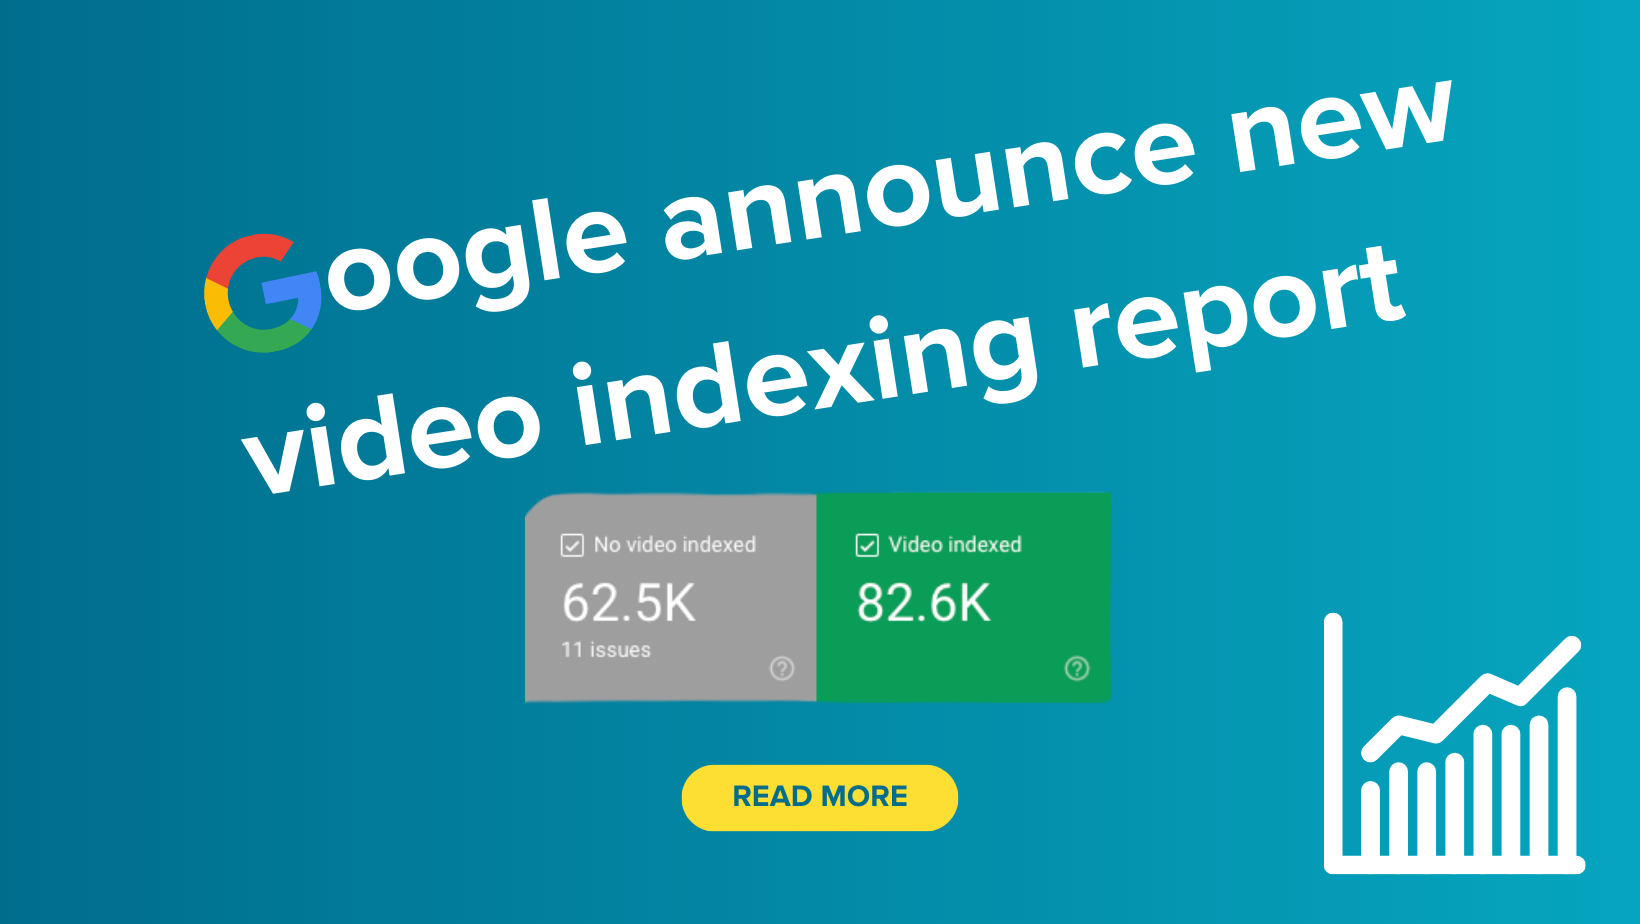 Google announce new video indexing report